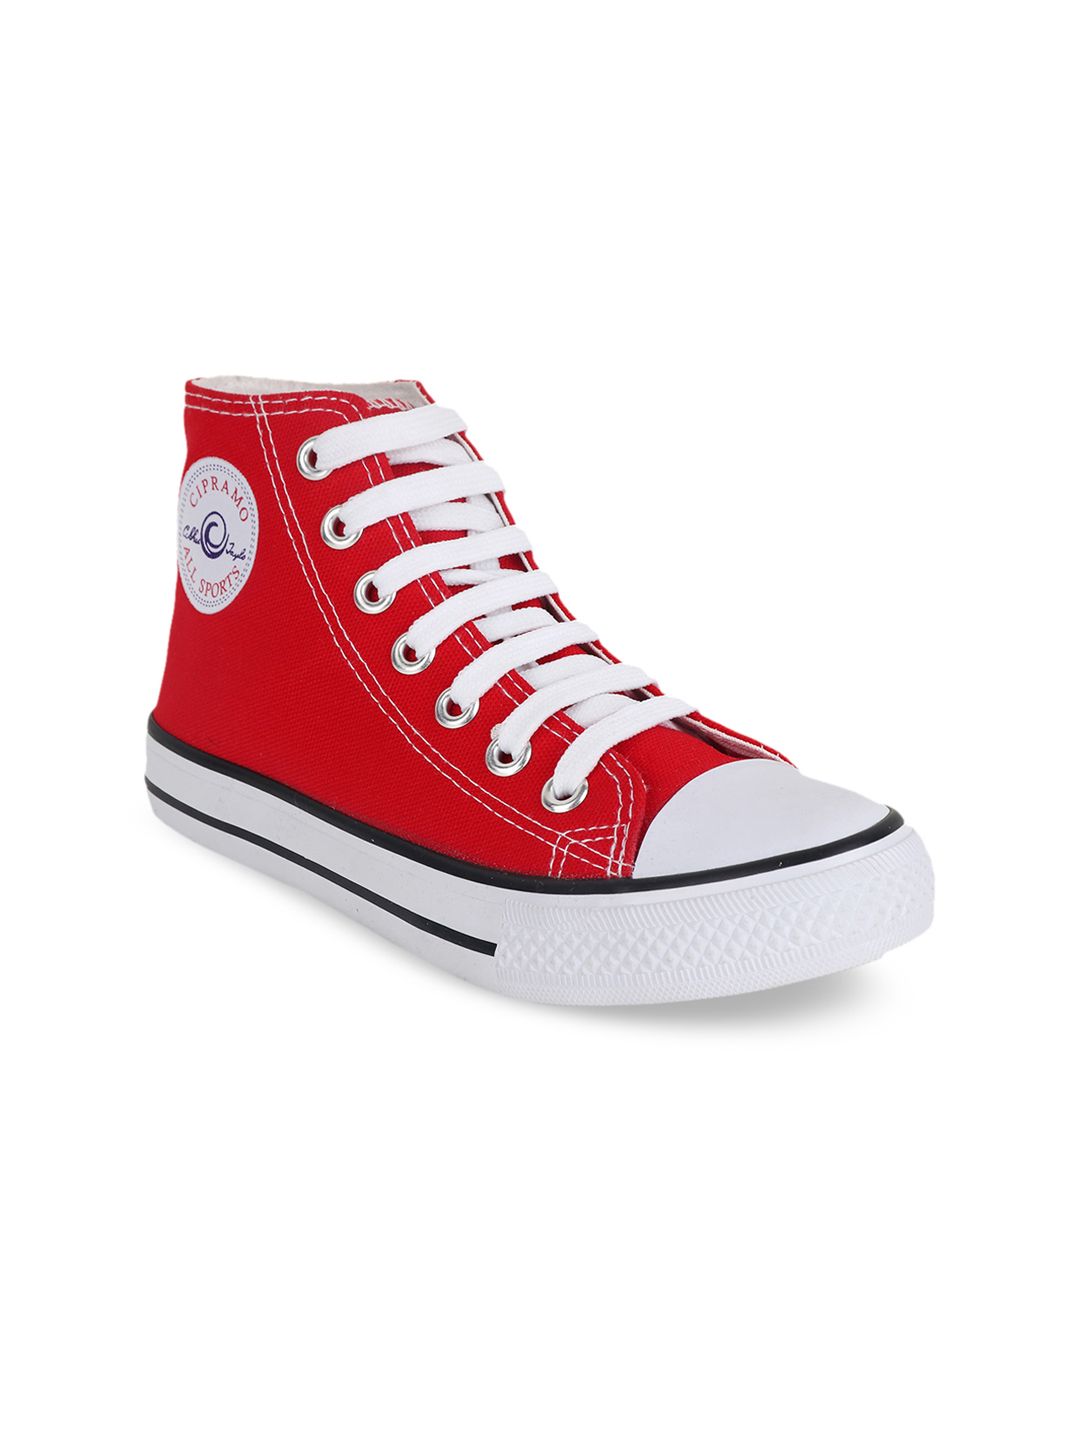 CIPRAMO SPORTS Women Red Mid-Top Casual Sneakers Price in India